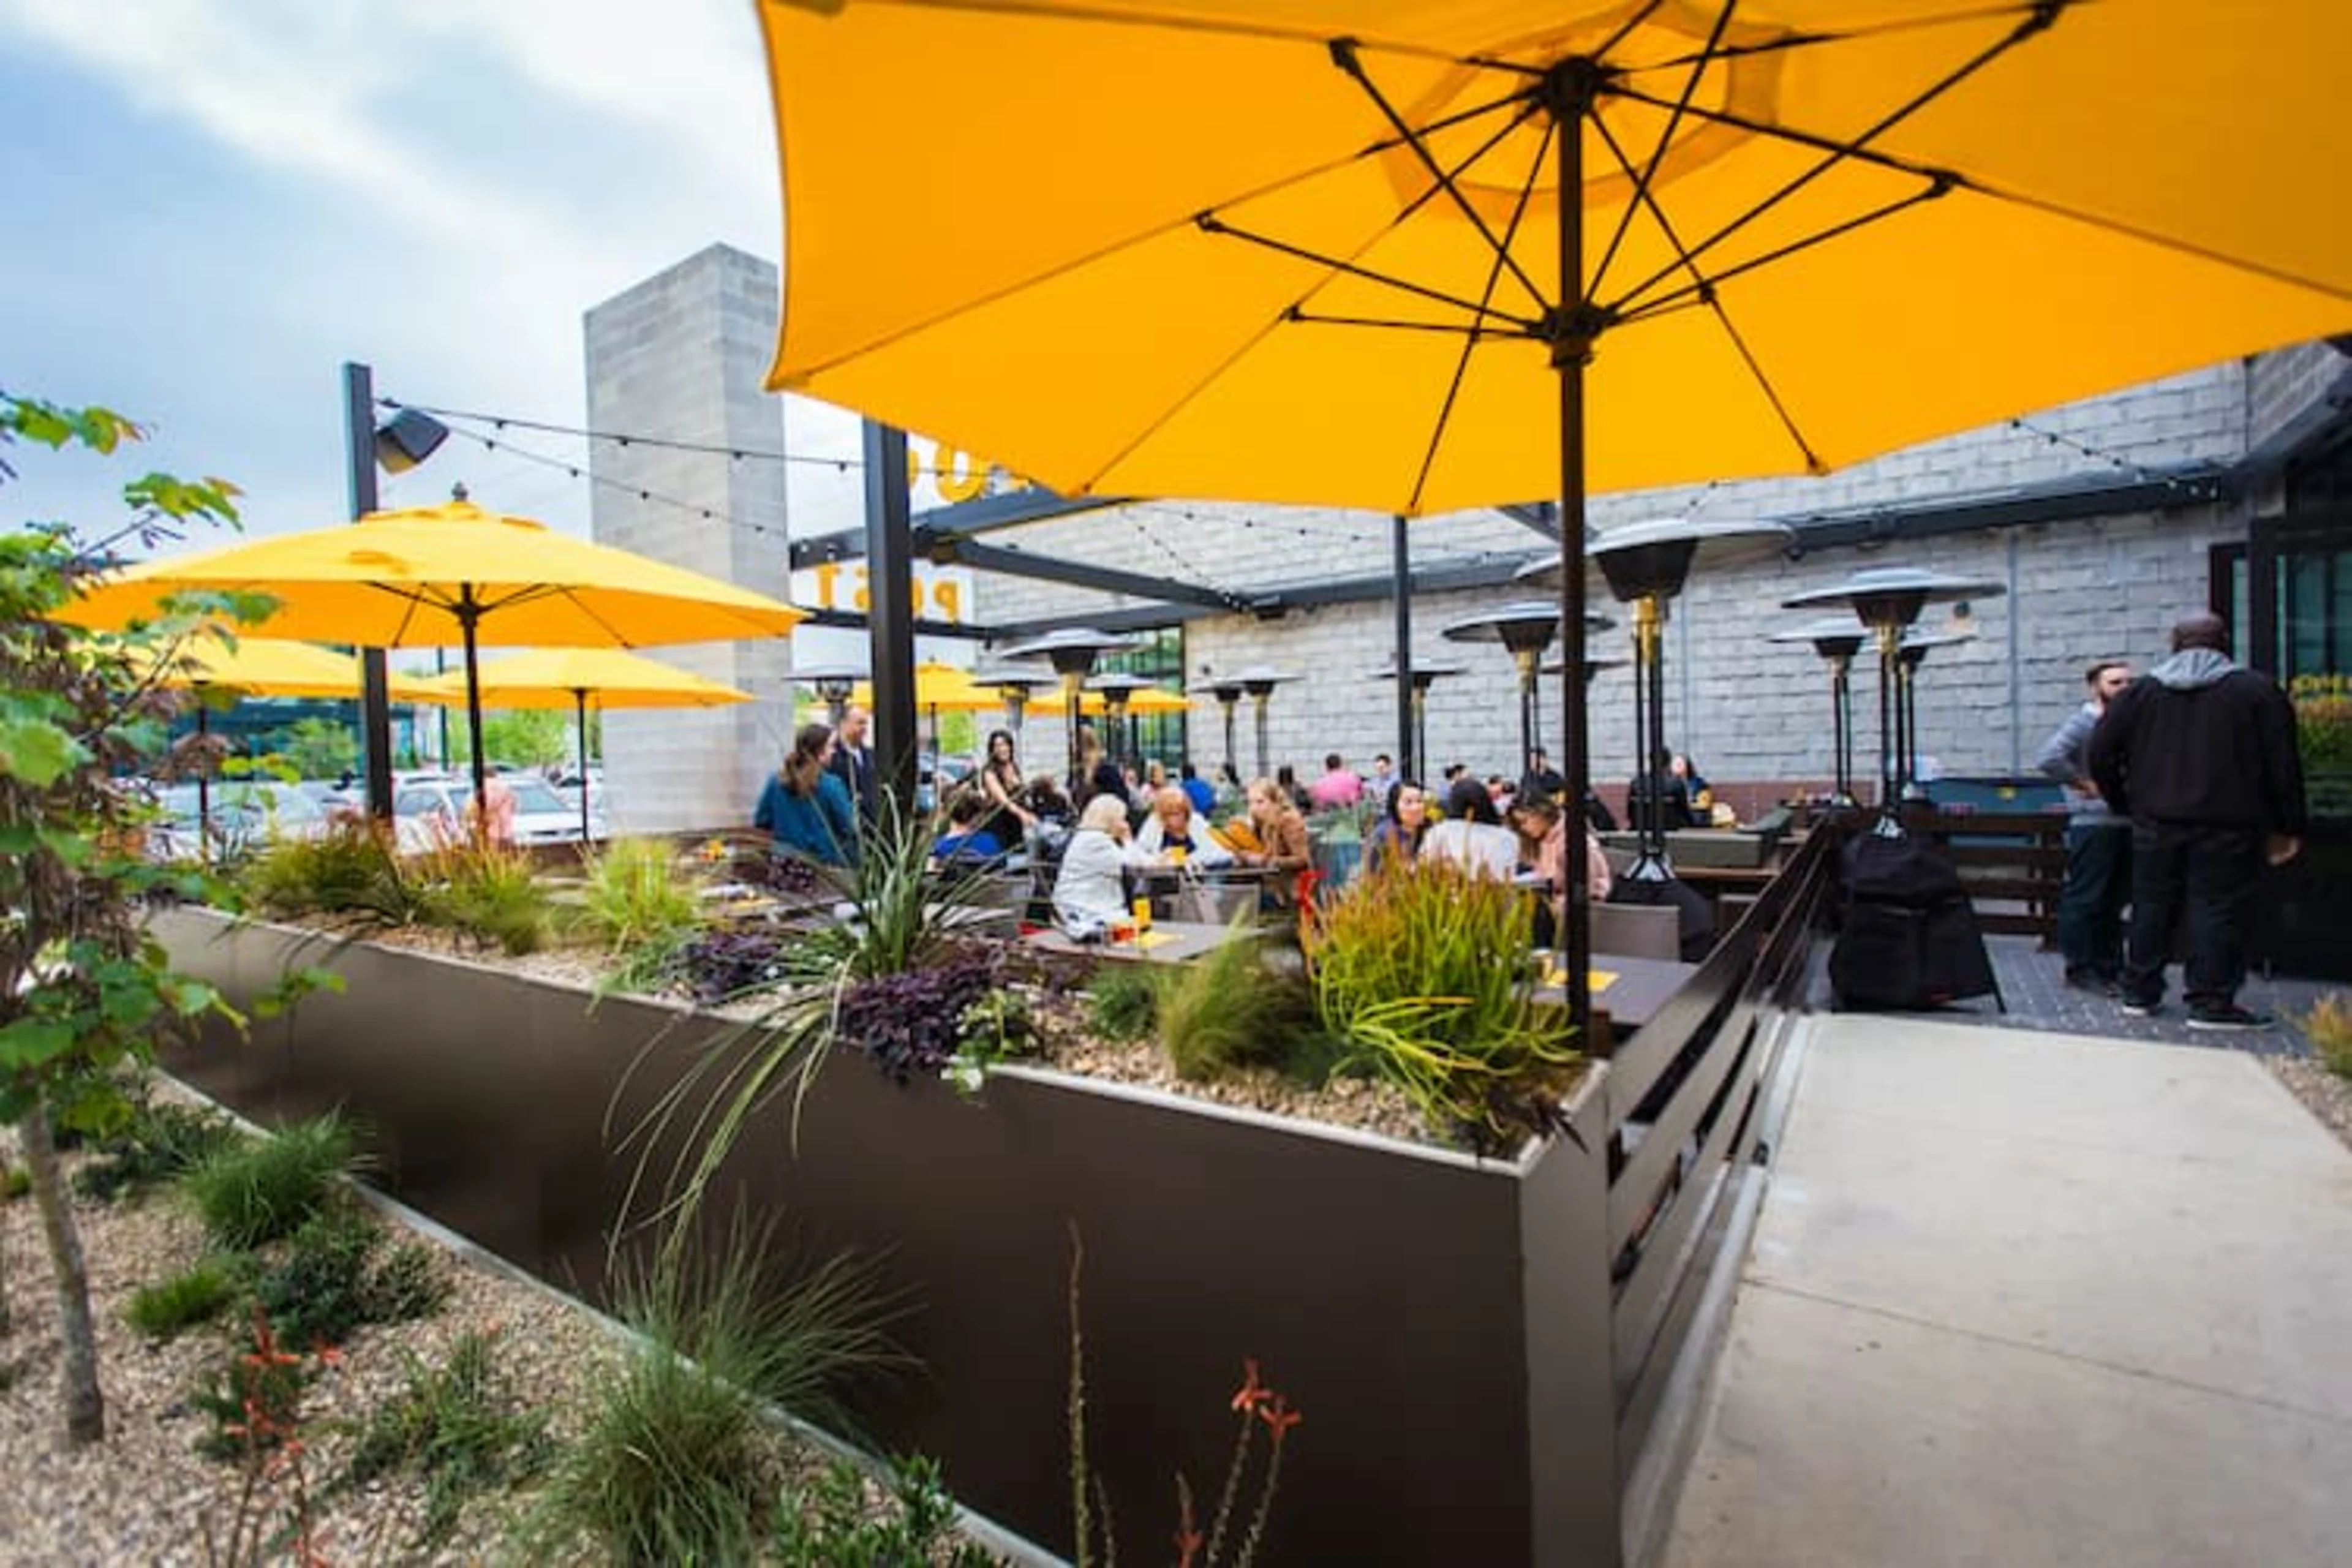 A restaurant patio with customers under yellow umbrellas.